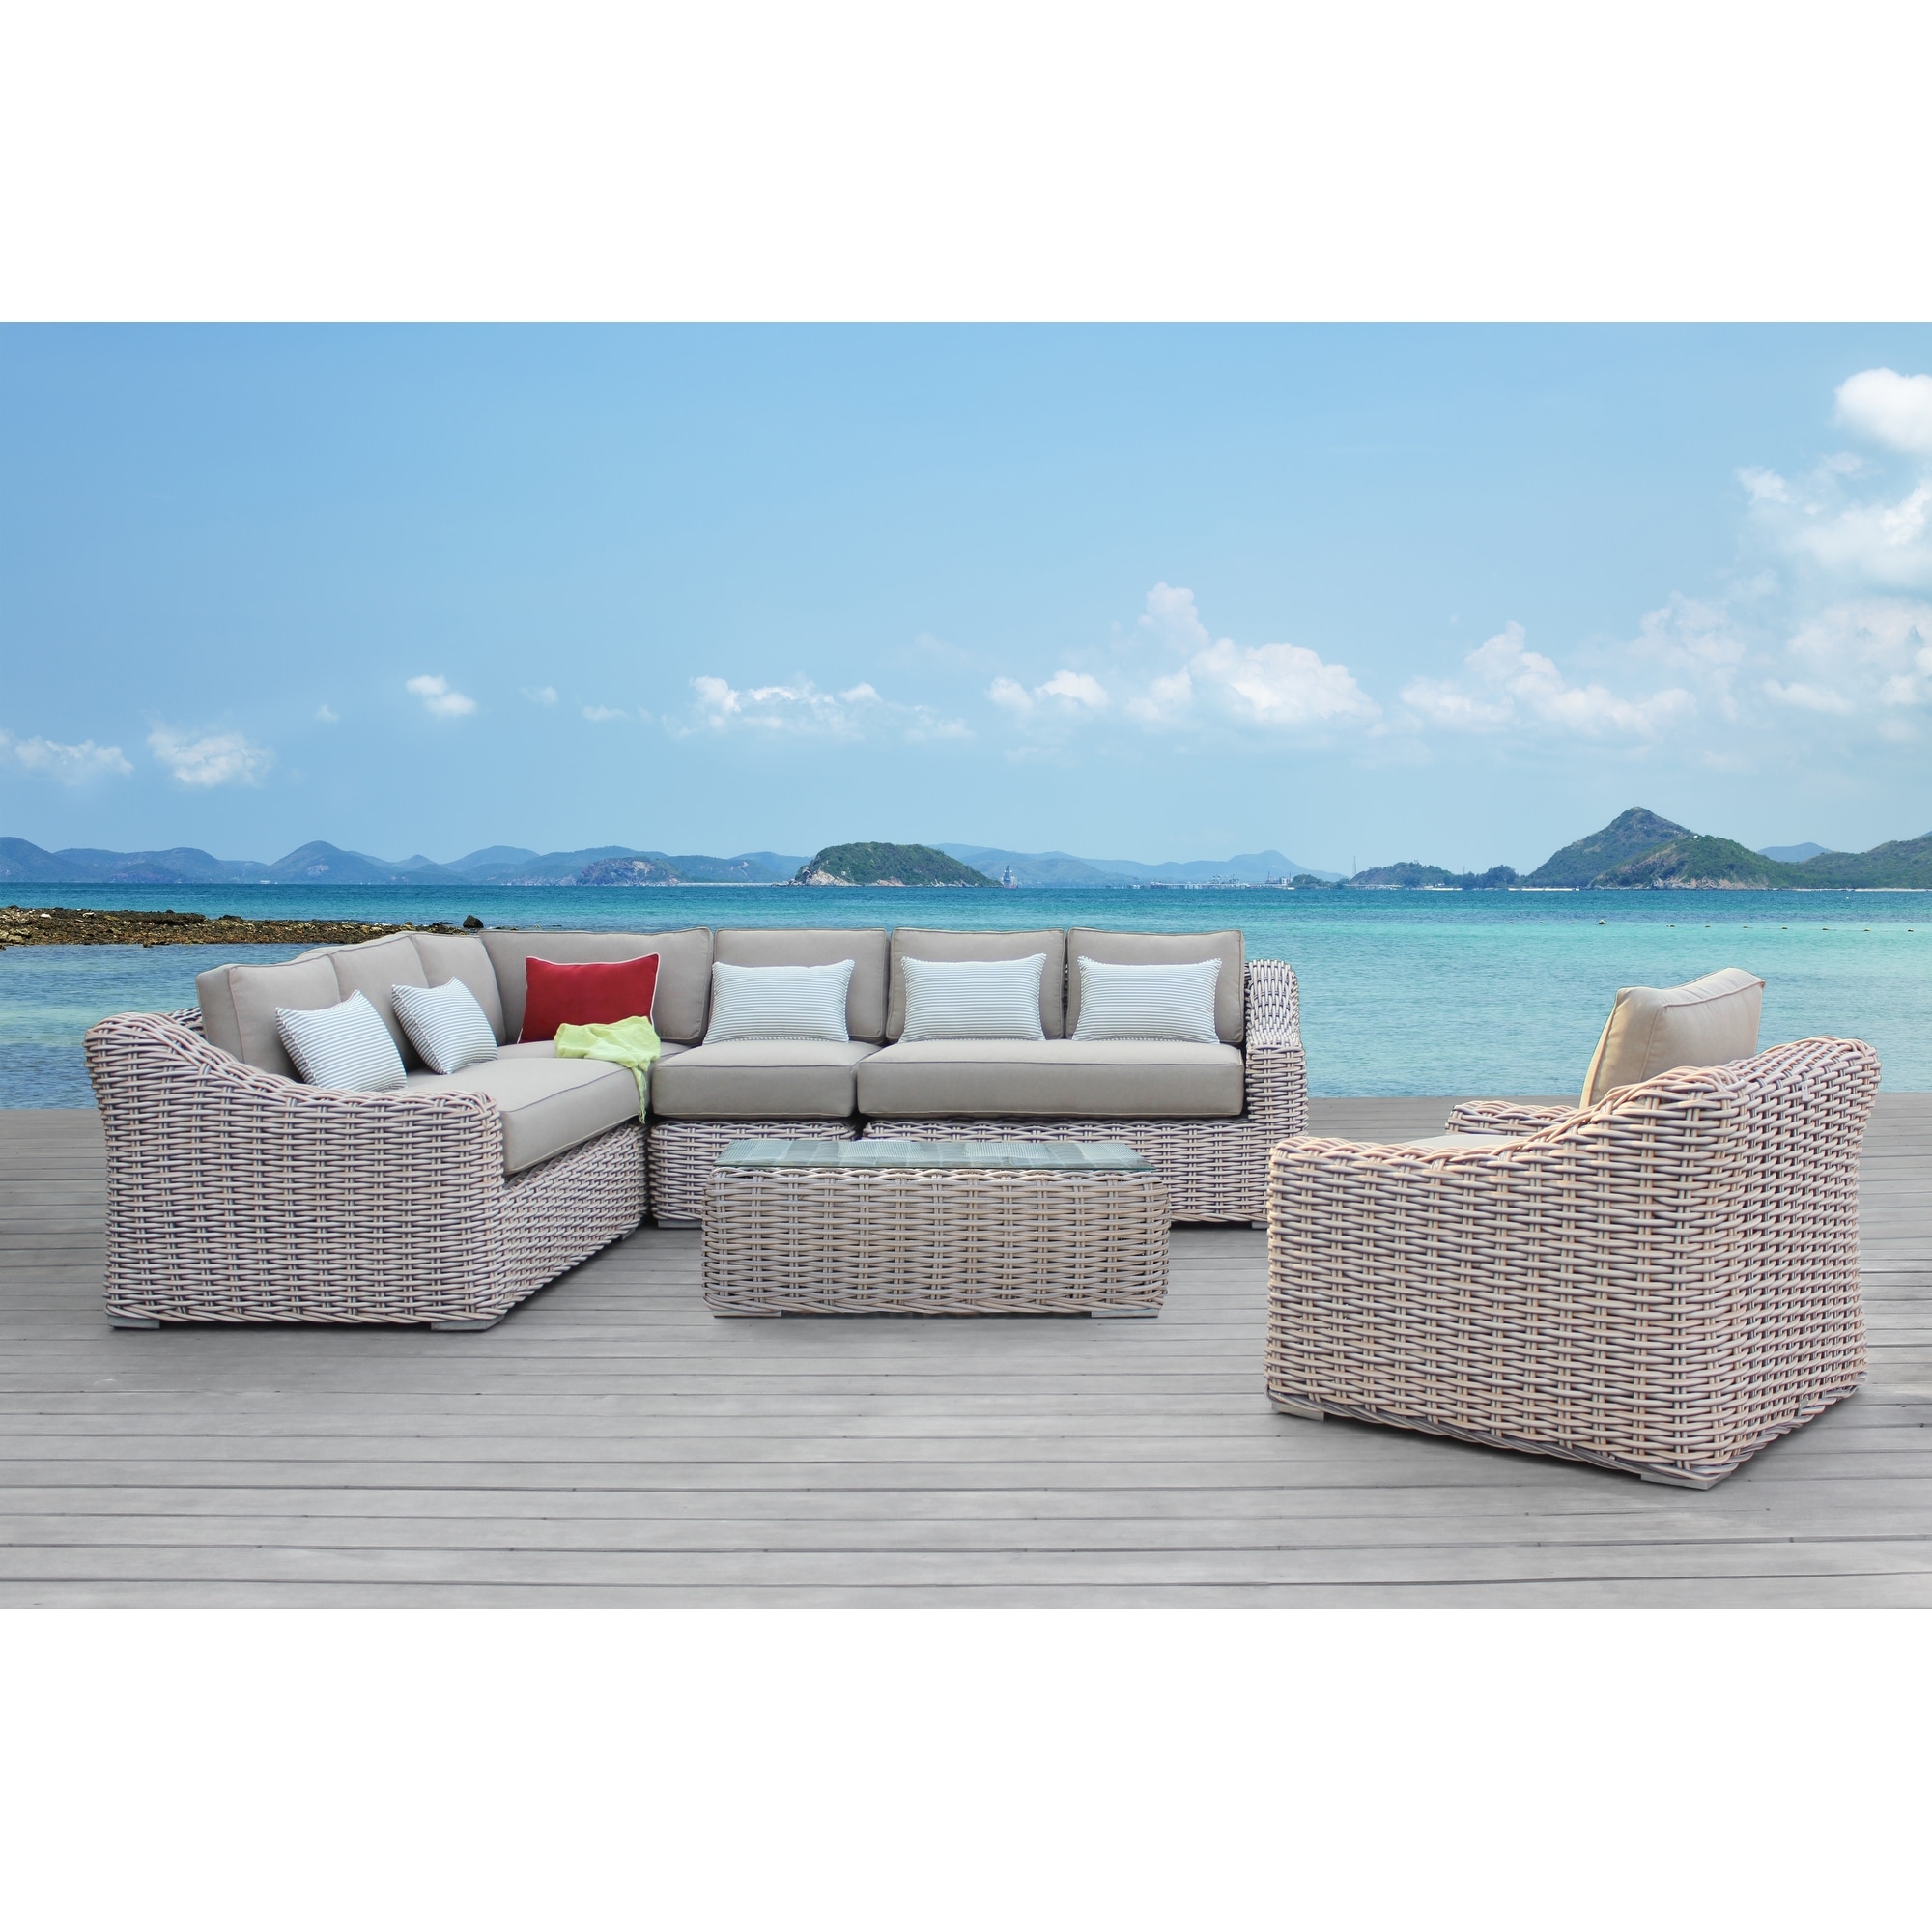 Alejandra 6-piece Outdoor Wicker Furniture Set With Coffee Table In White And Grey